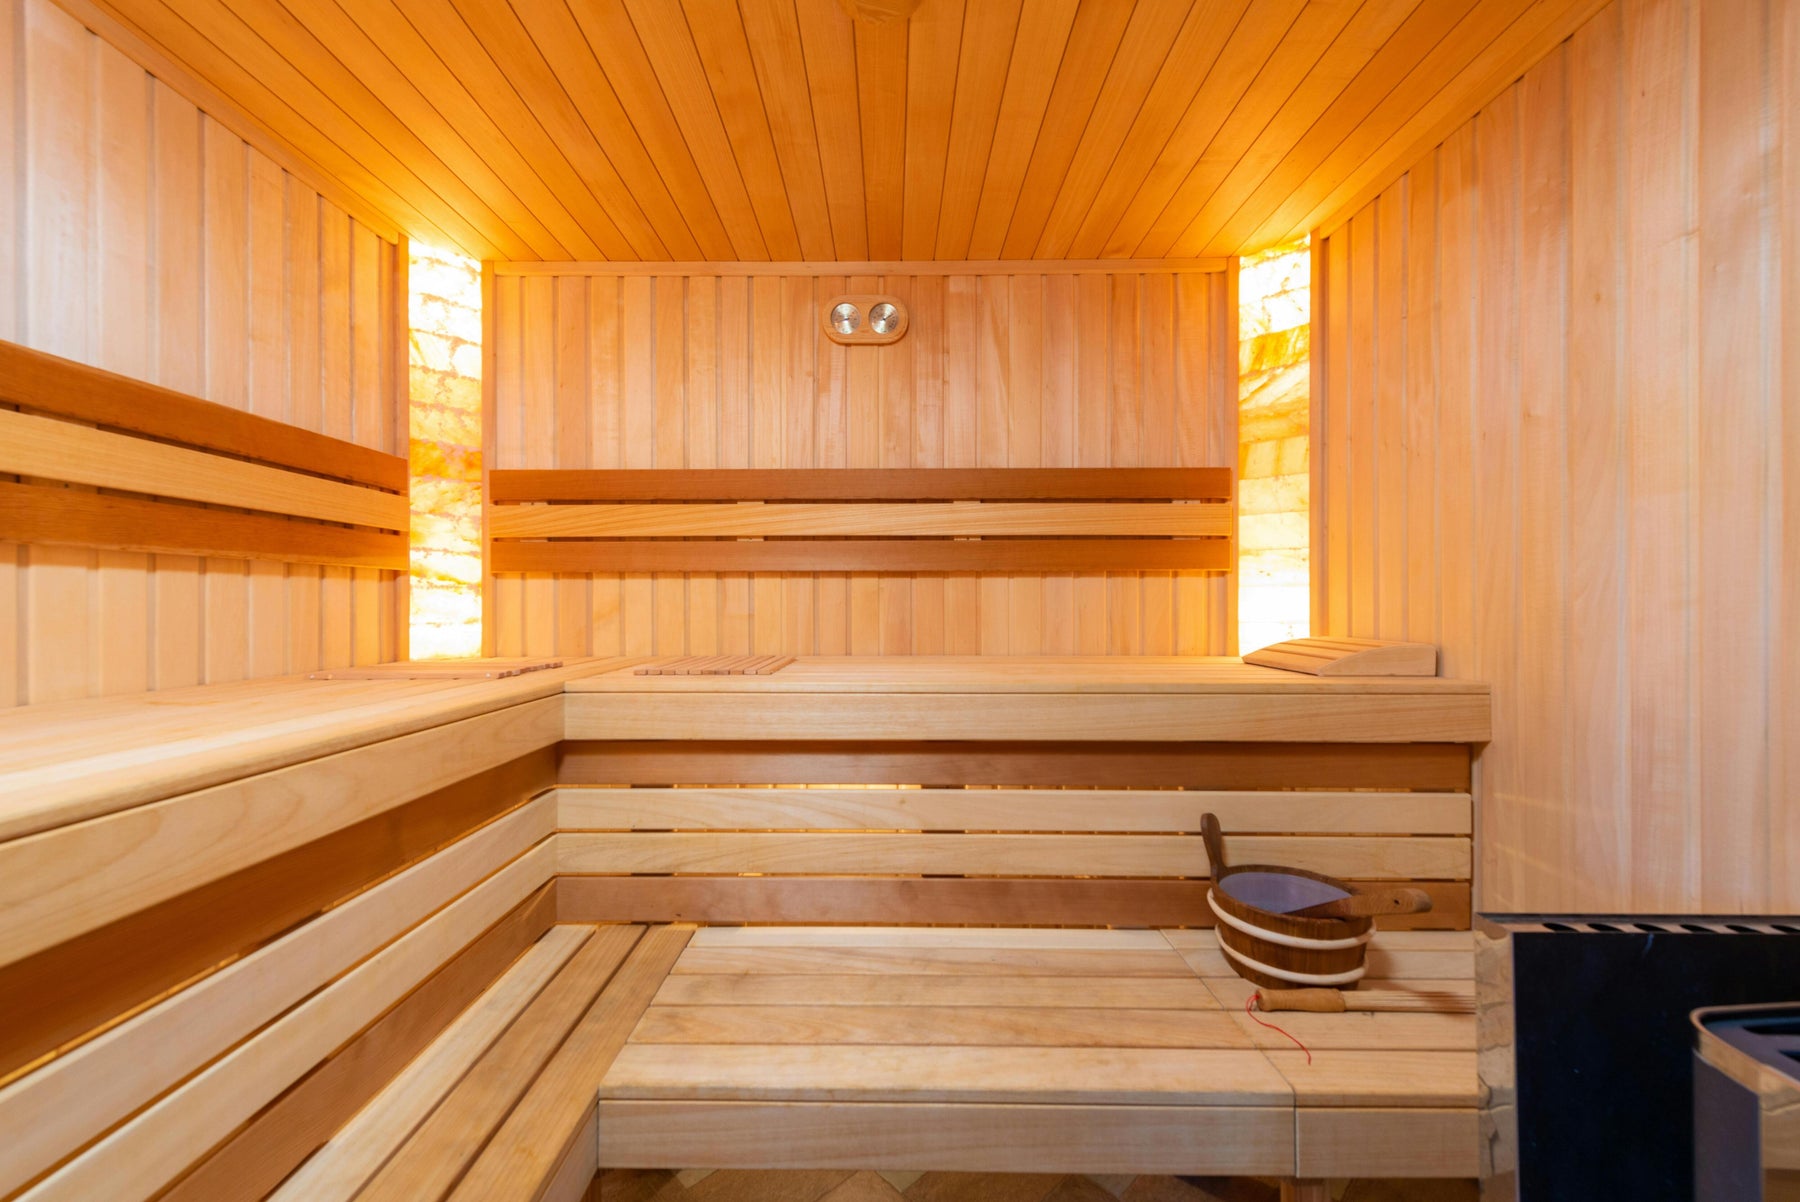 The Benefits of Sauna: More Than Just a Relaxing Escape